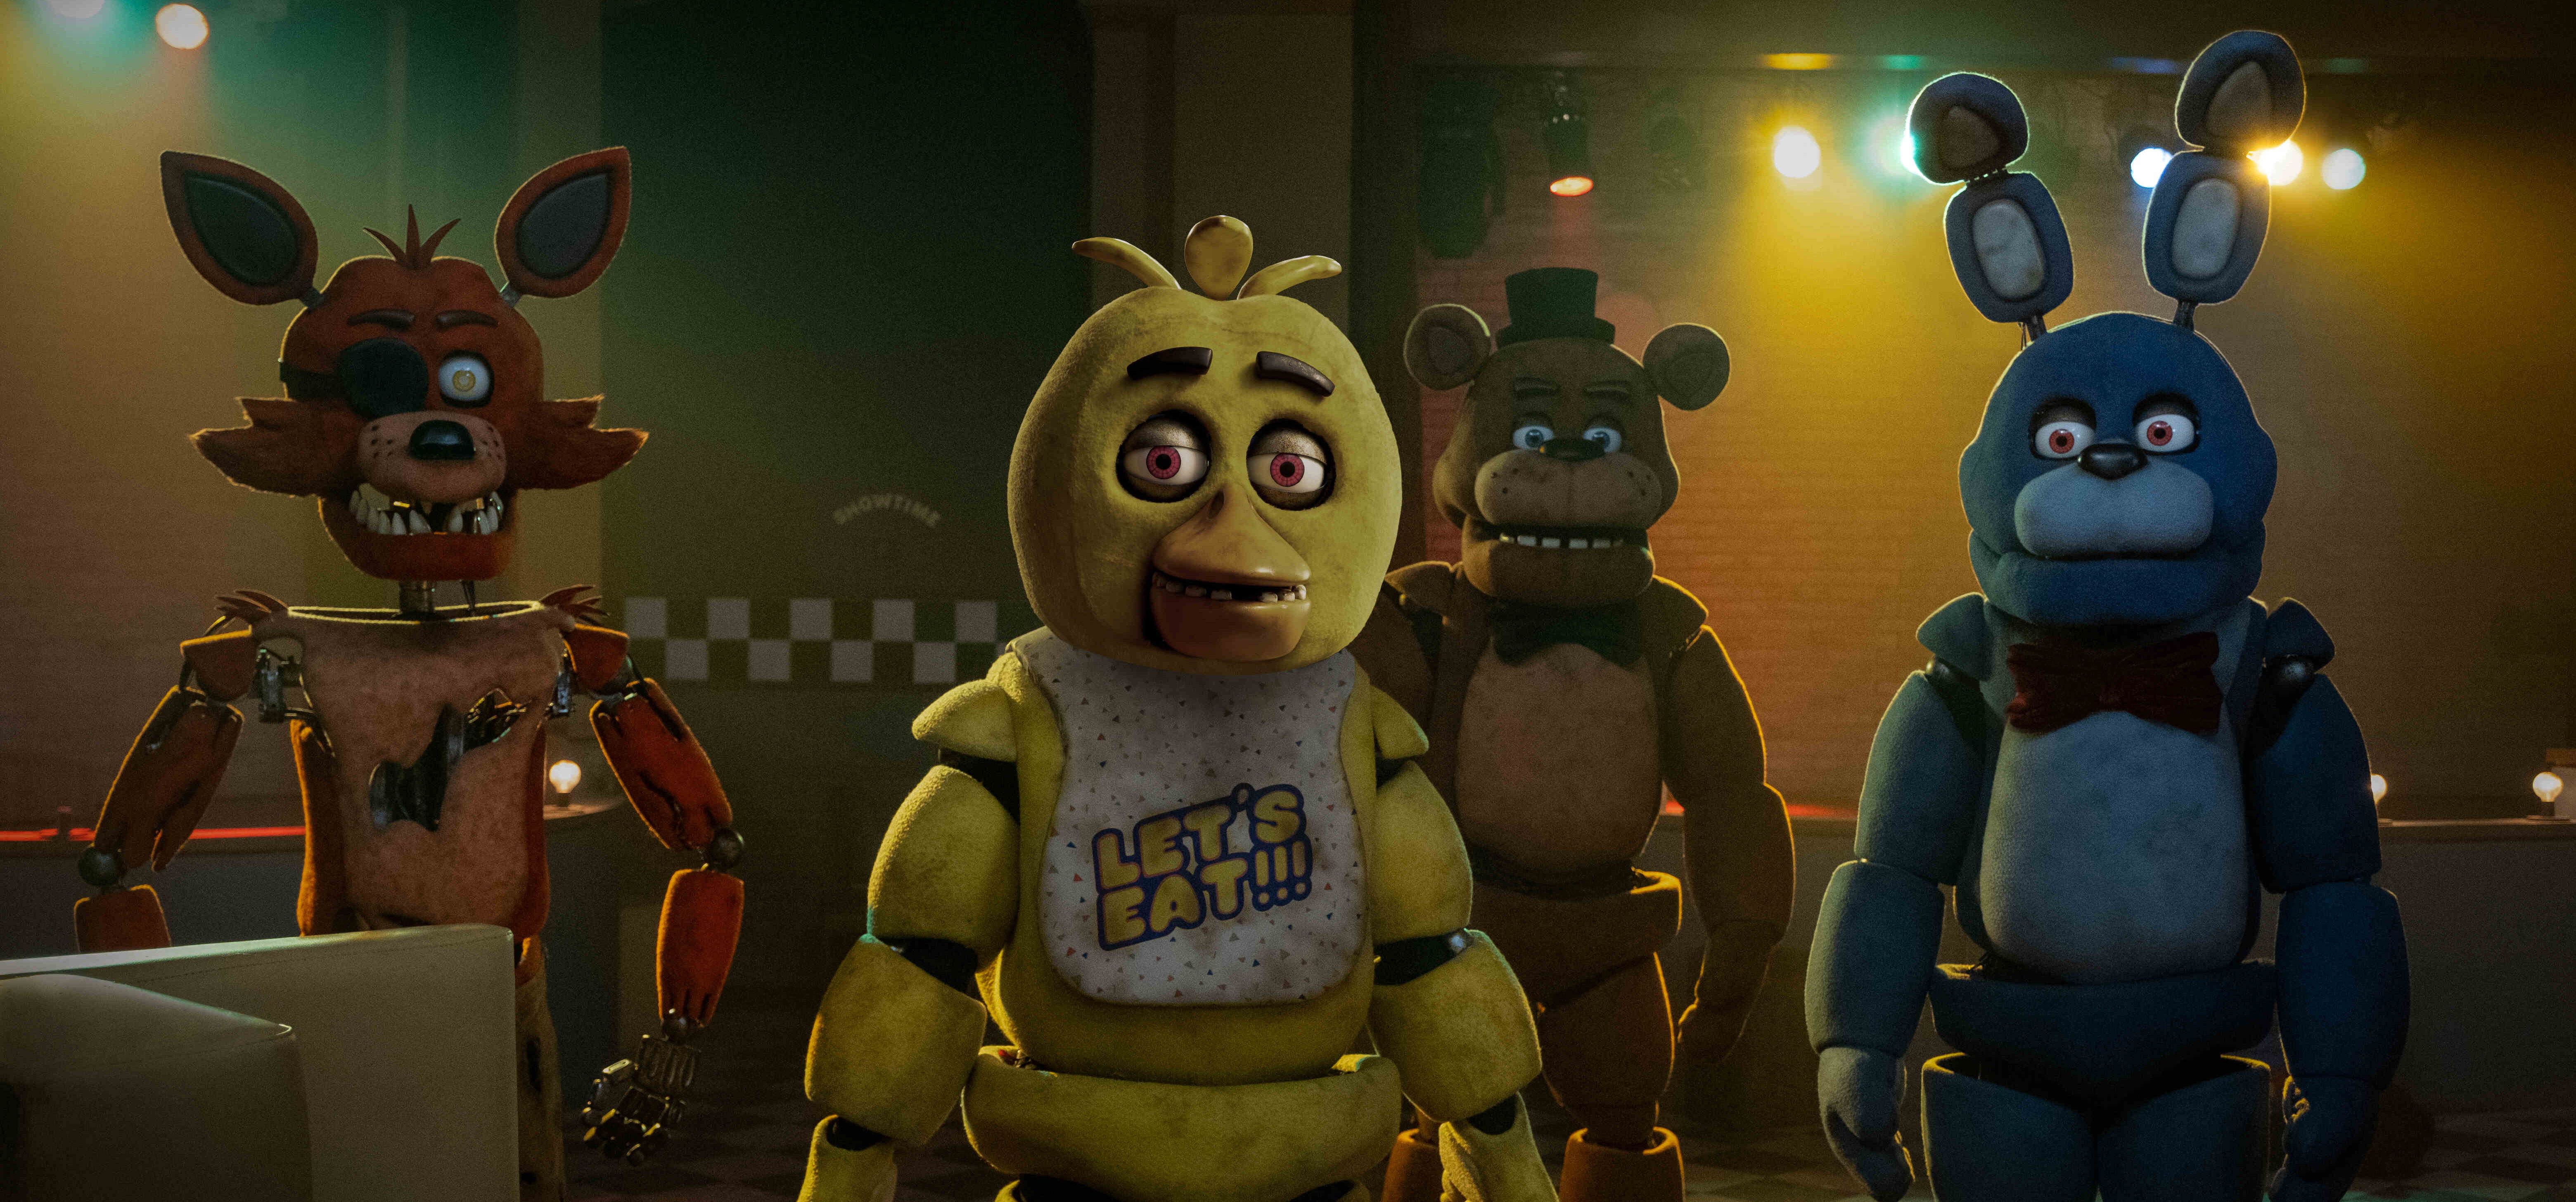 Where and Where Does FNAF Movie Take Place?